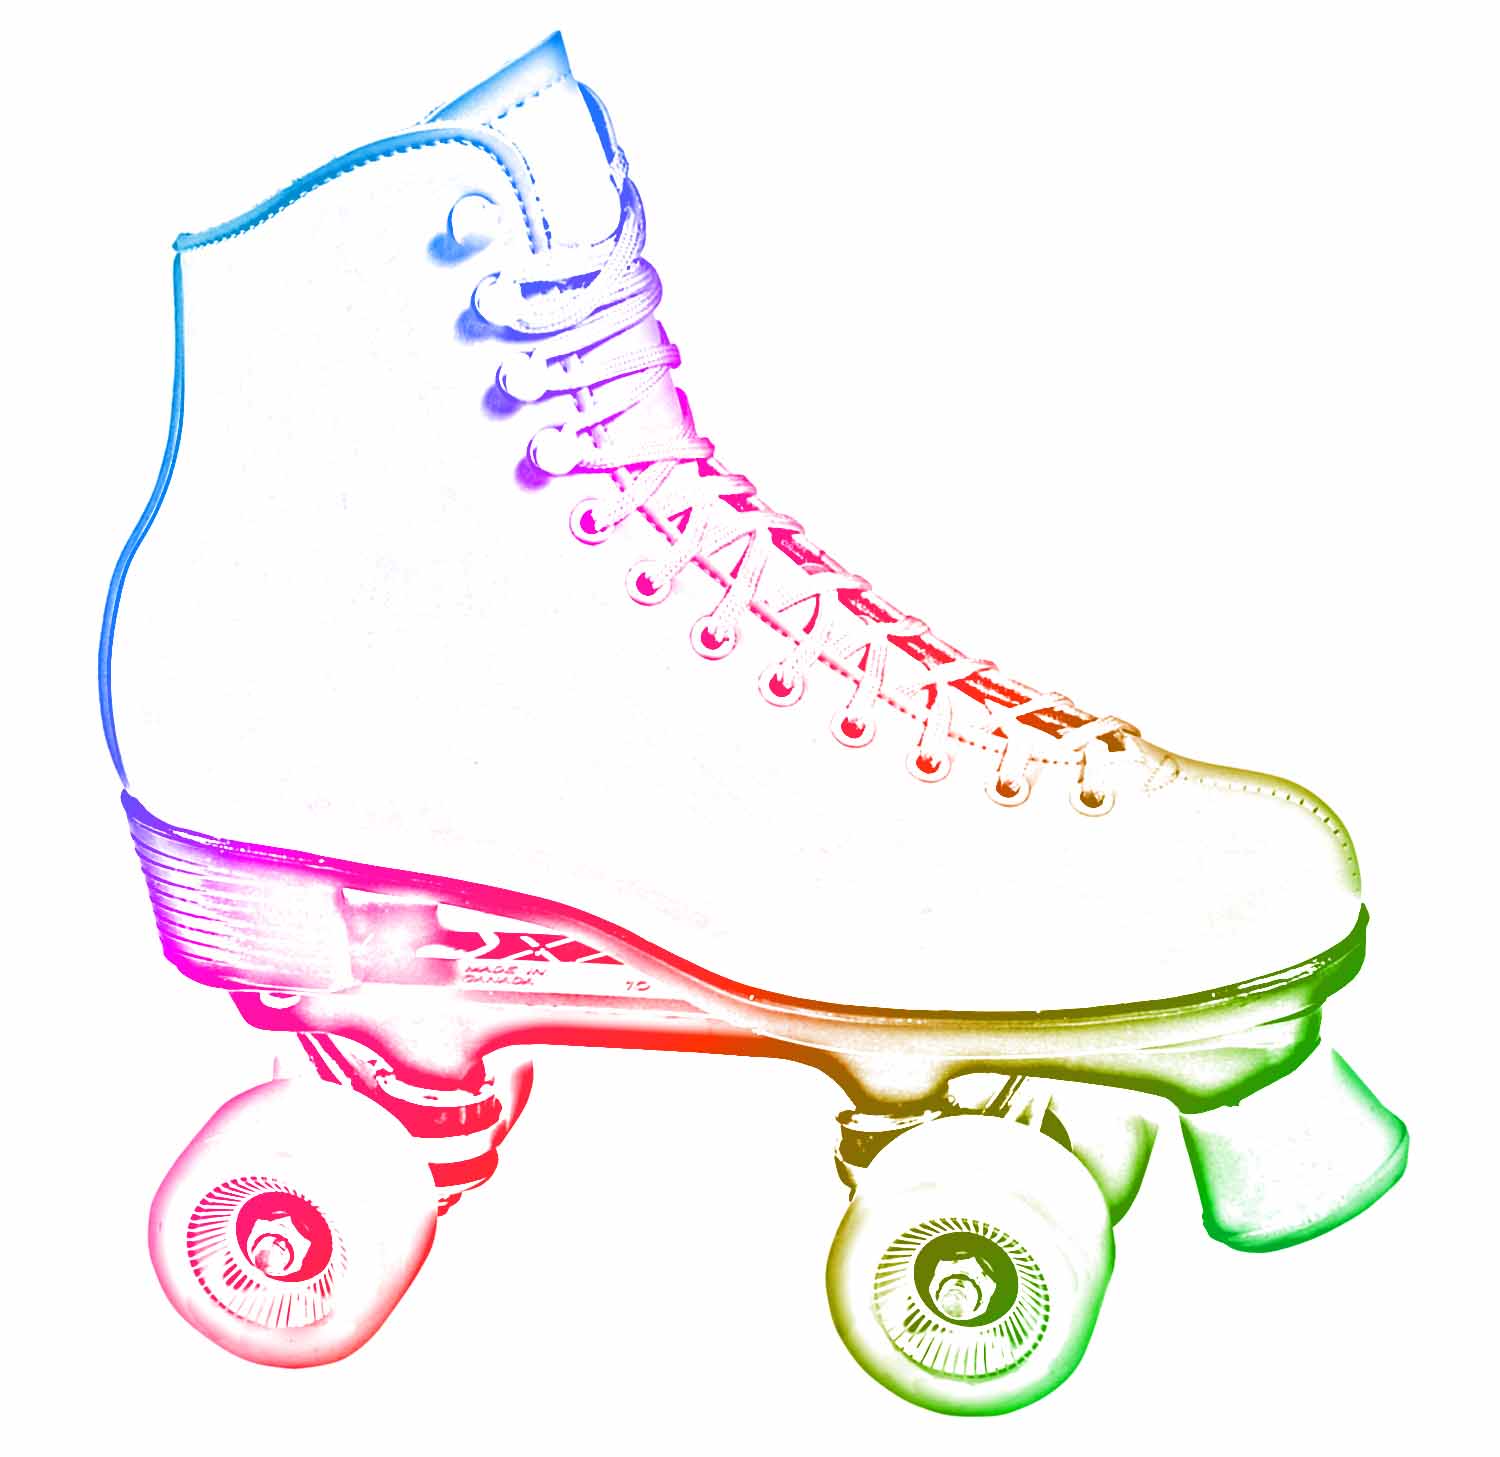 Free Roller Skate Cliparts, Download Free Roller Skate Cliparts png ...